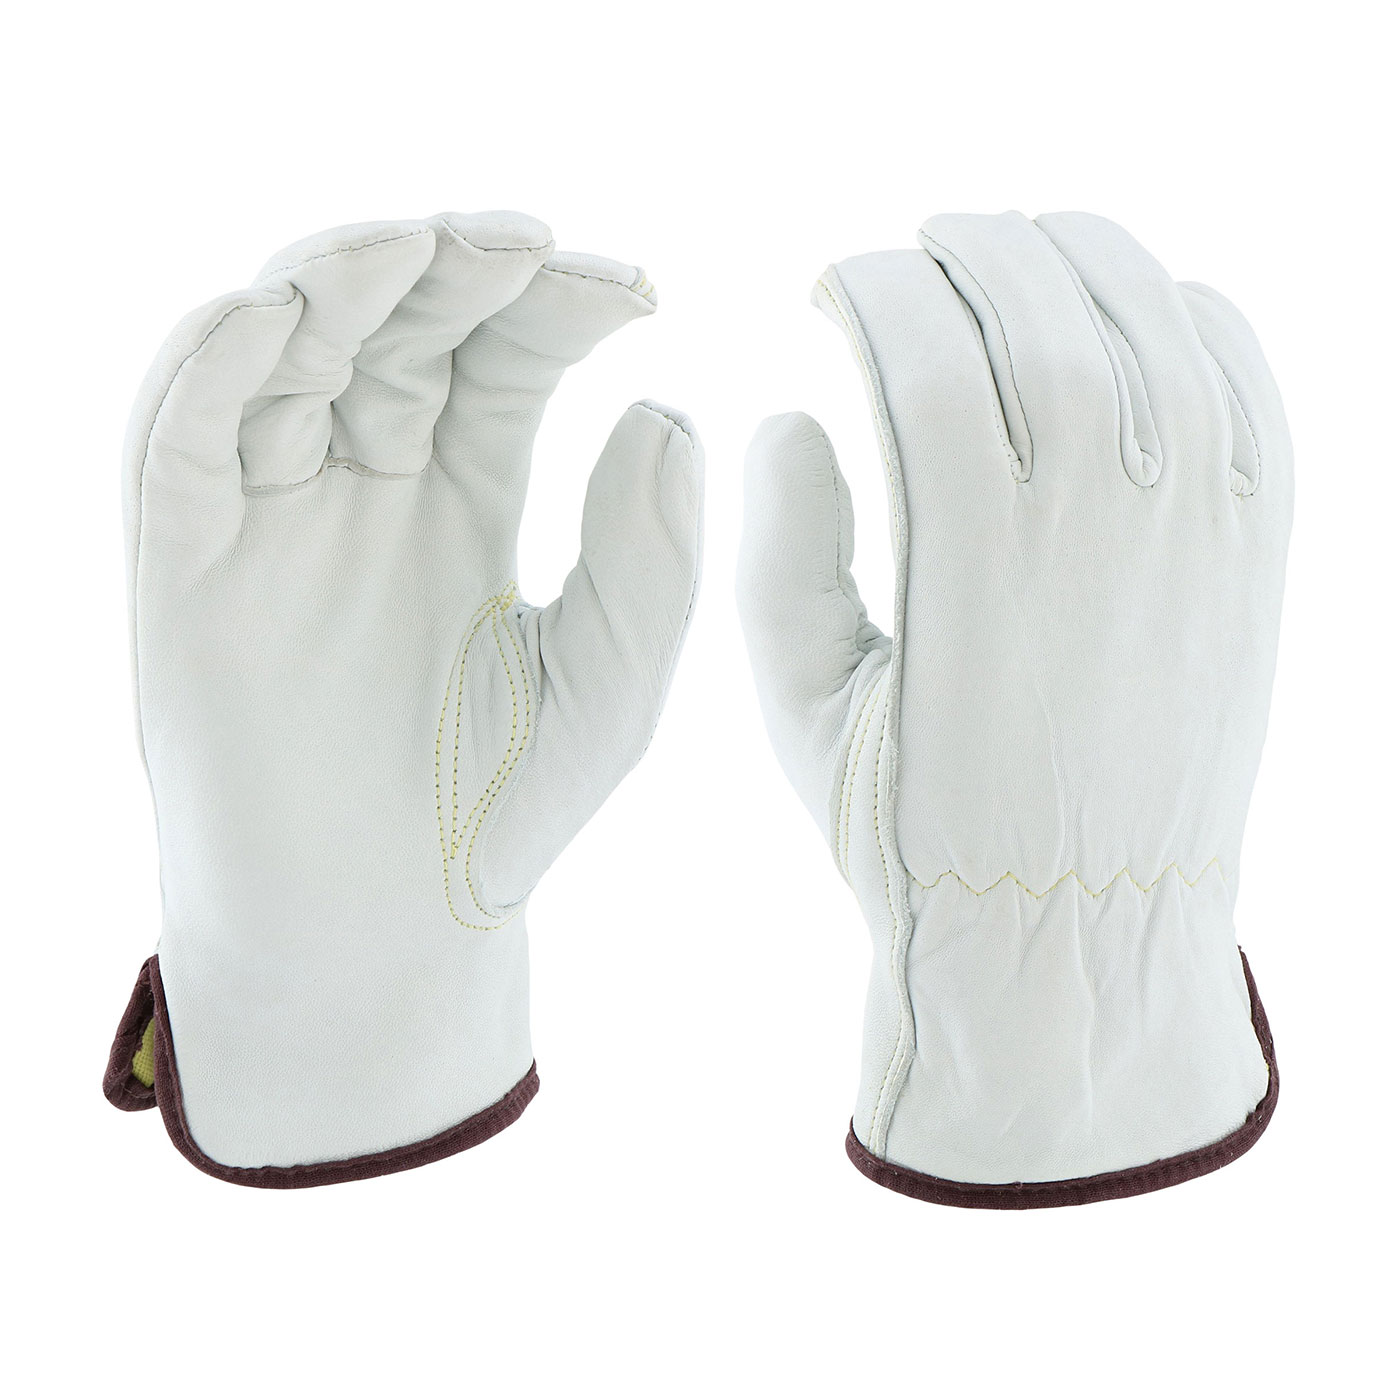 PIP® 9110/XL Cut and Sewn Standard Grade Cut-Resistant Gloves, XL, Sheep Grain Leather, Slip-On Cuff, Resists: Abrasion, Cut, Puncture and Tear, ANSI Cut-Resistance Level: A4, Paired Hand